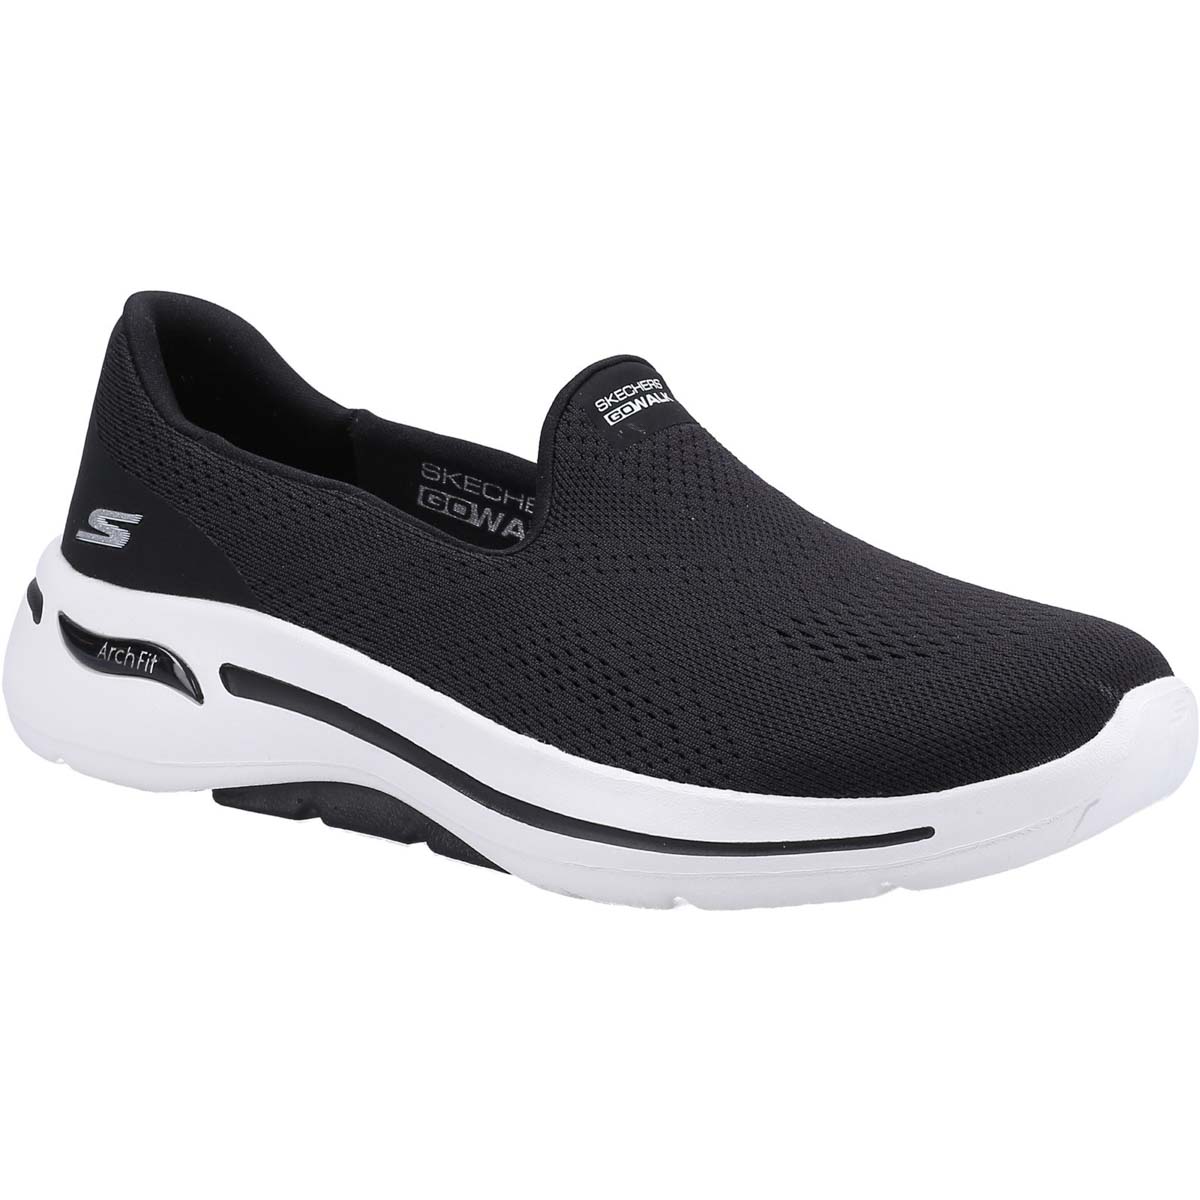 Skechers Go Walk Arch Fit Imagined Black Womens Trainers 124483 In Size 5 In Plain Black